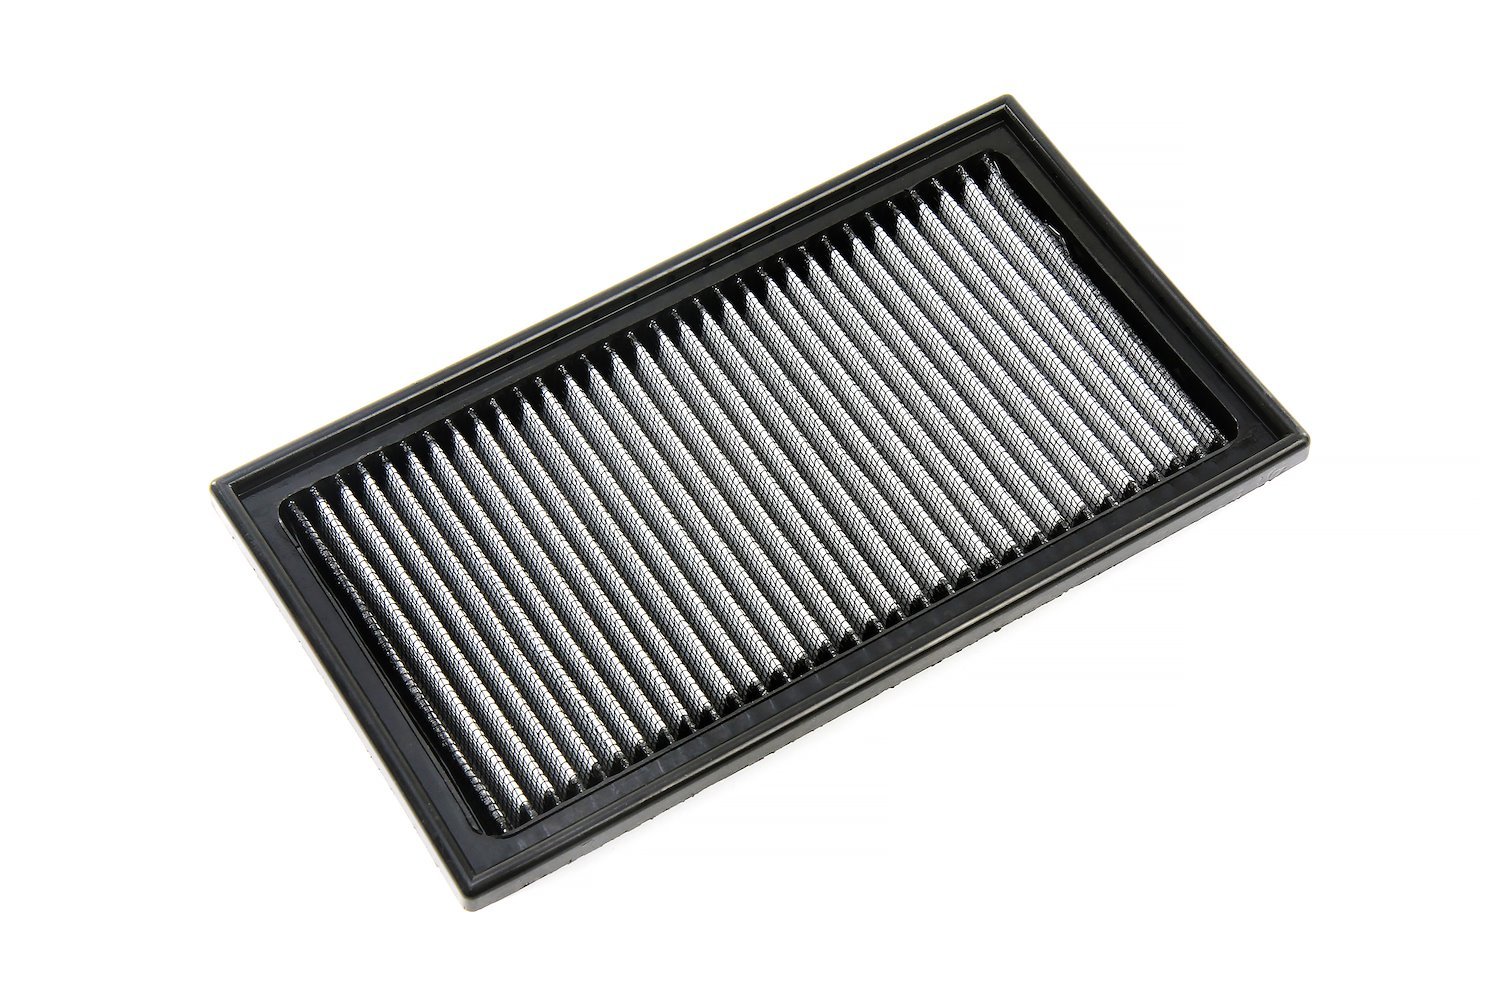 HPS-457318 Performance Drop-In Air Filter, Directly Replaces OEM Drop-In Panel Filter, Improves Performance & Fuel Economy